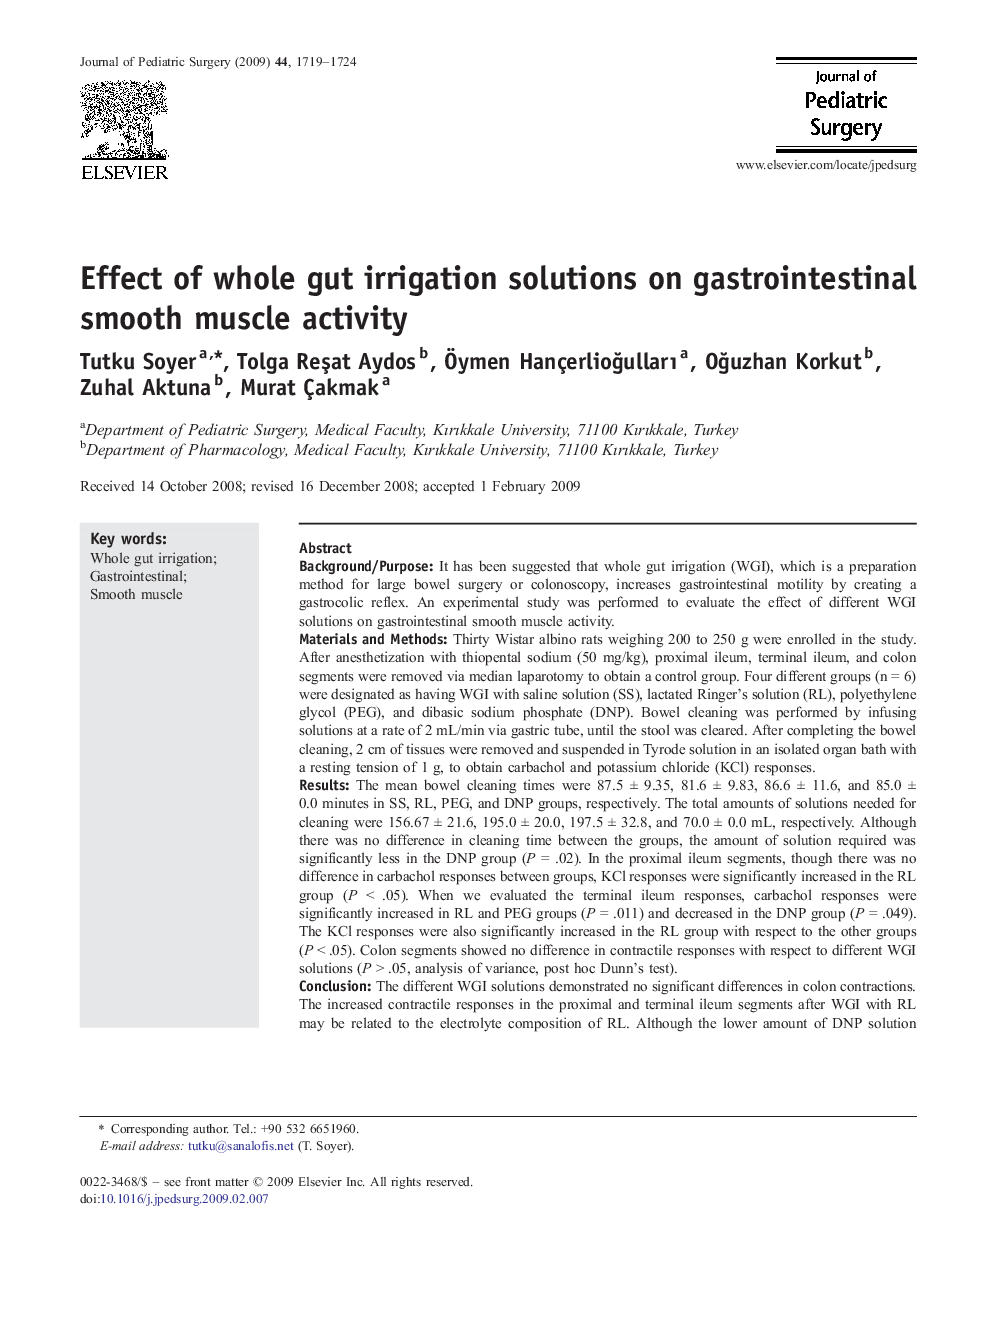 Effect of whole gut irrigation solutions on gastrointestinal smooth muscle activity